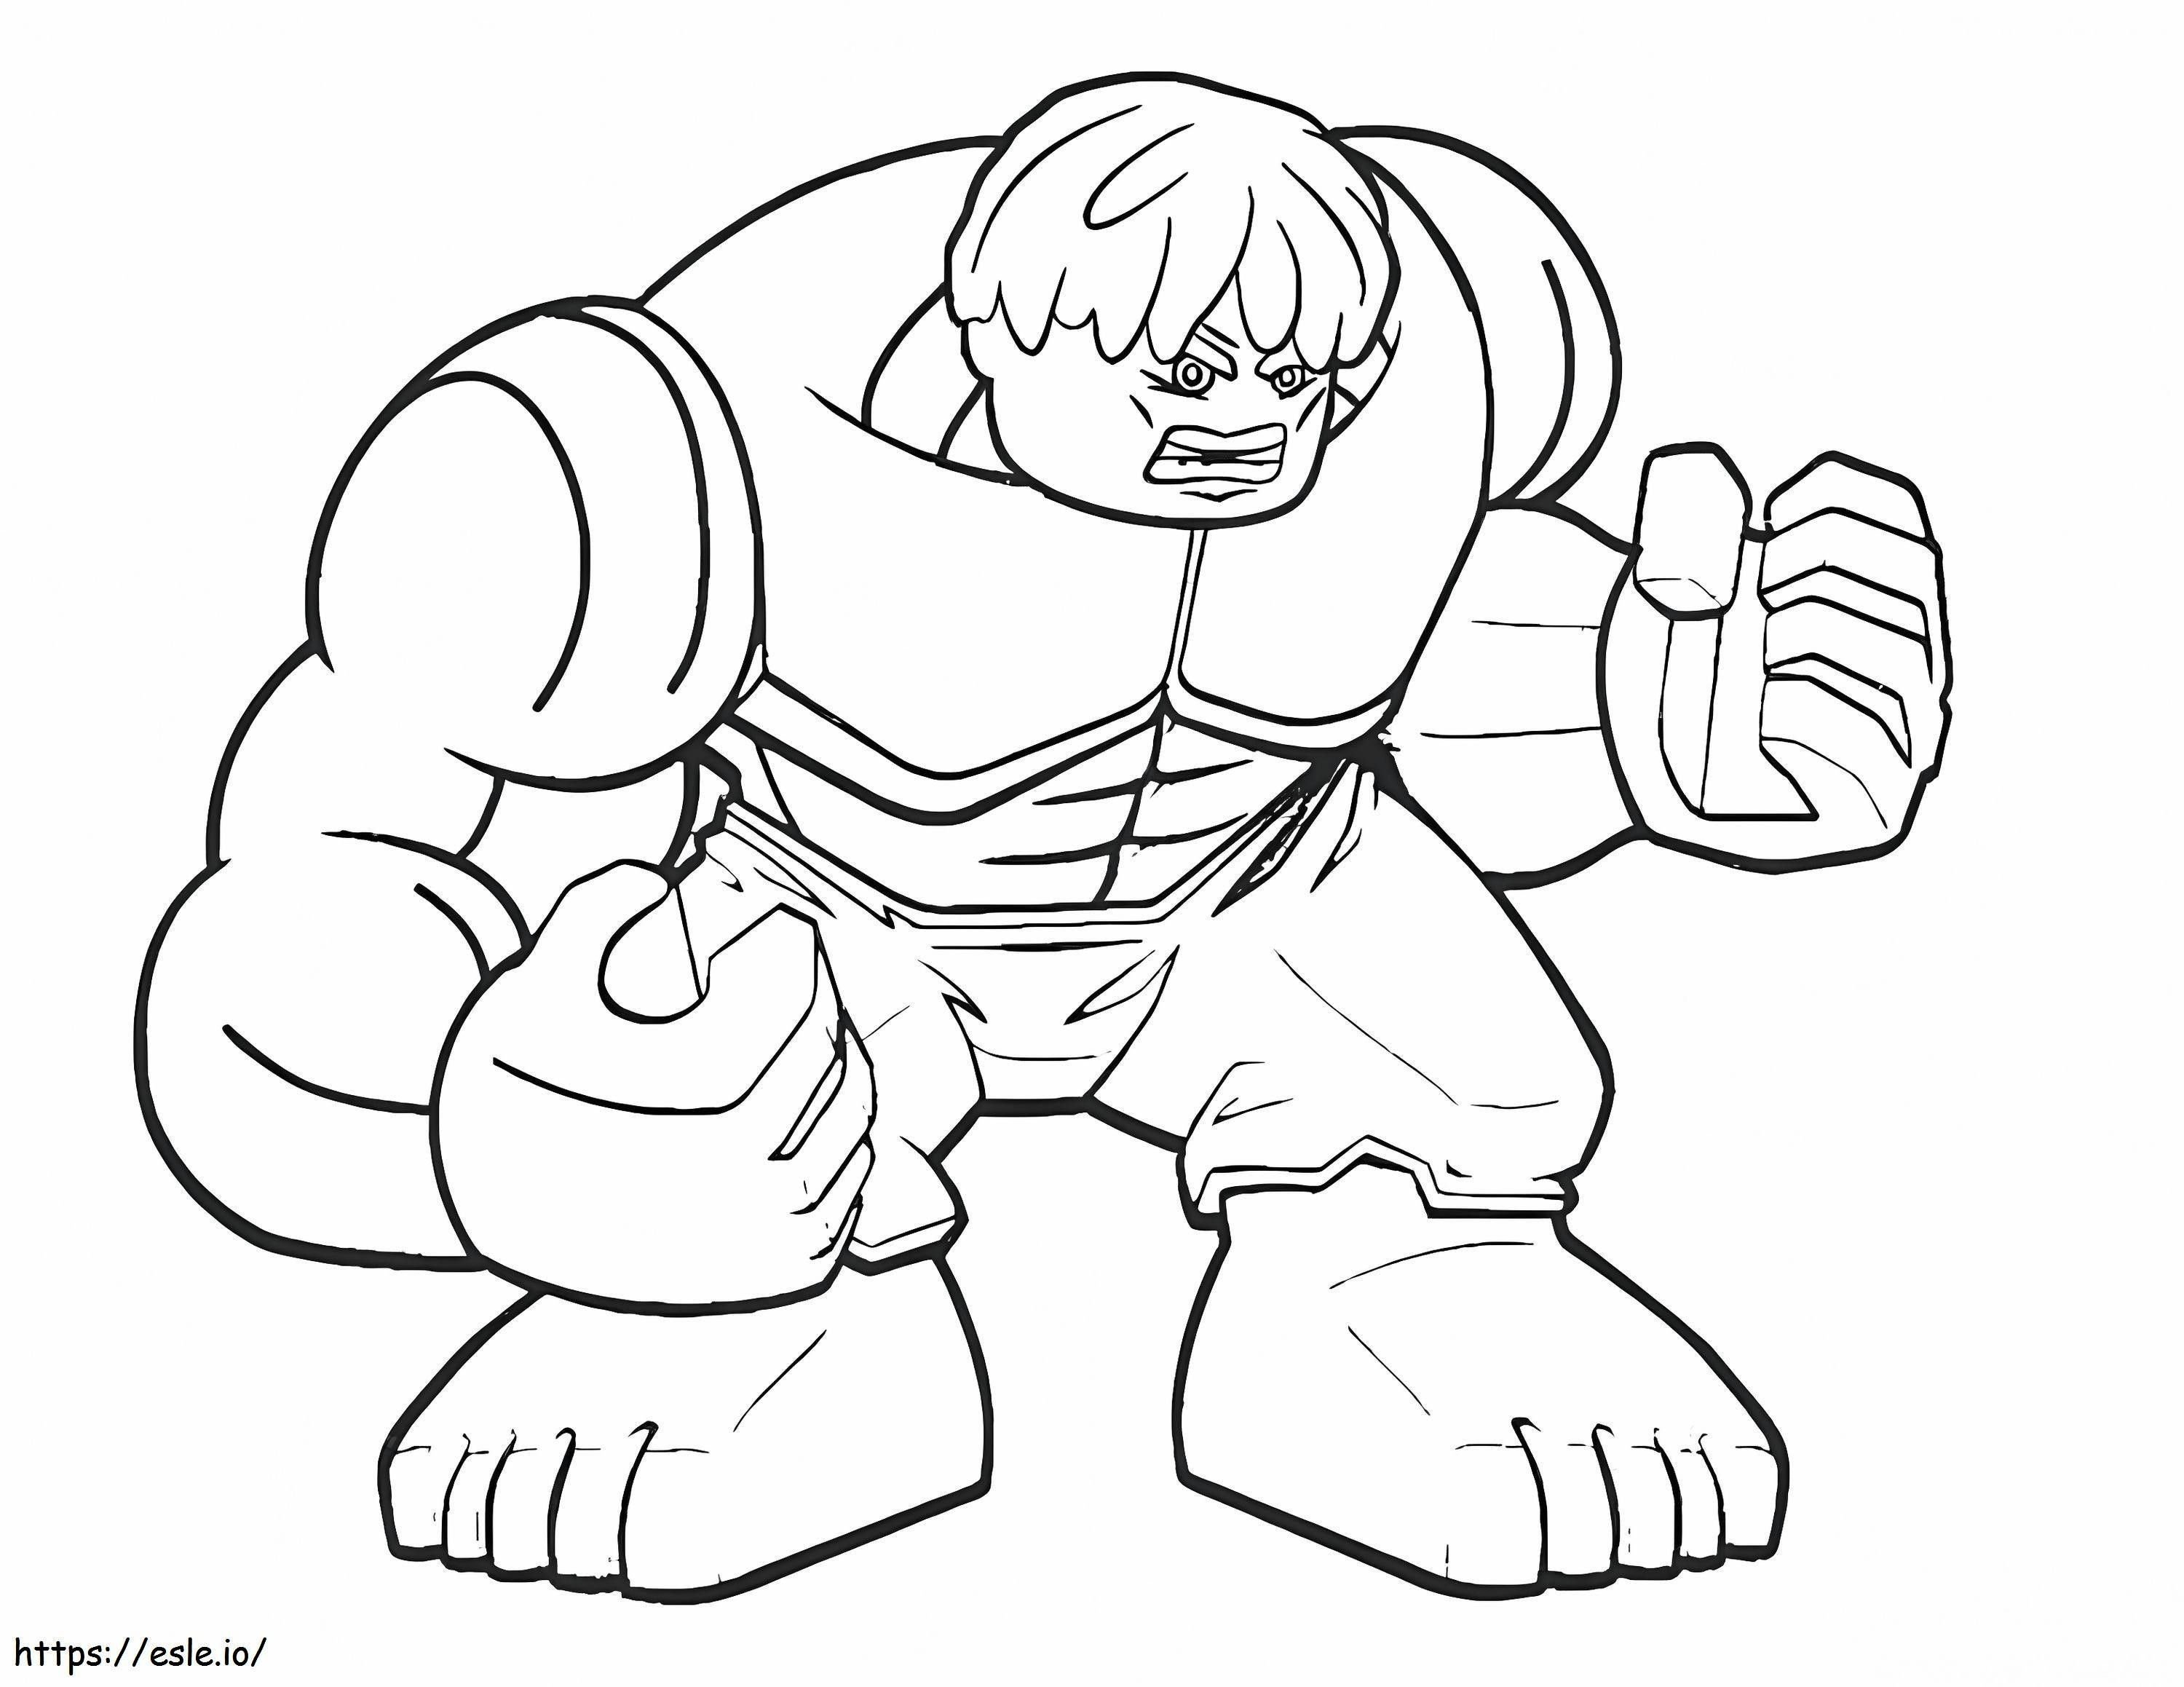 Angry Lego Hulk 1 coloring page